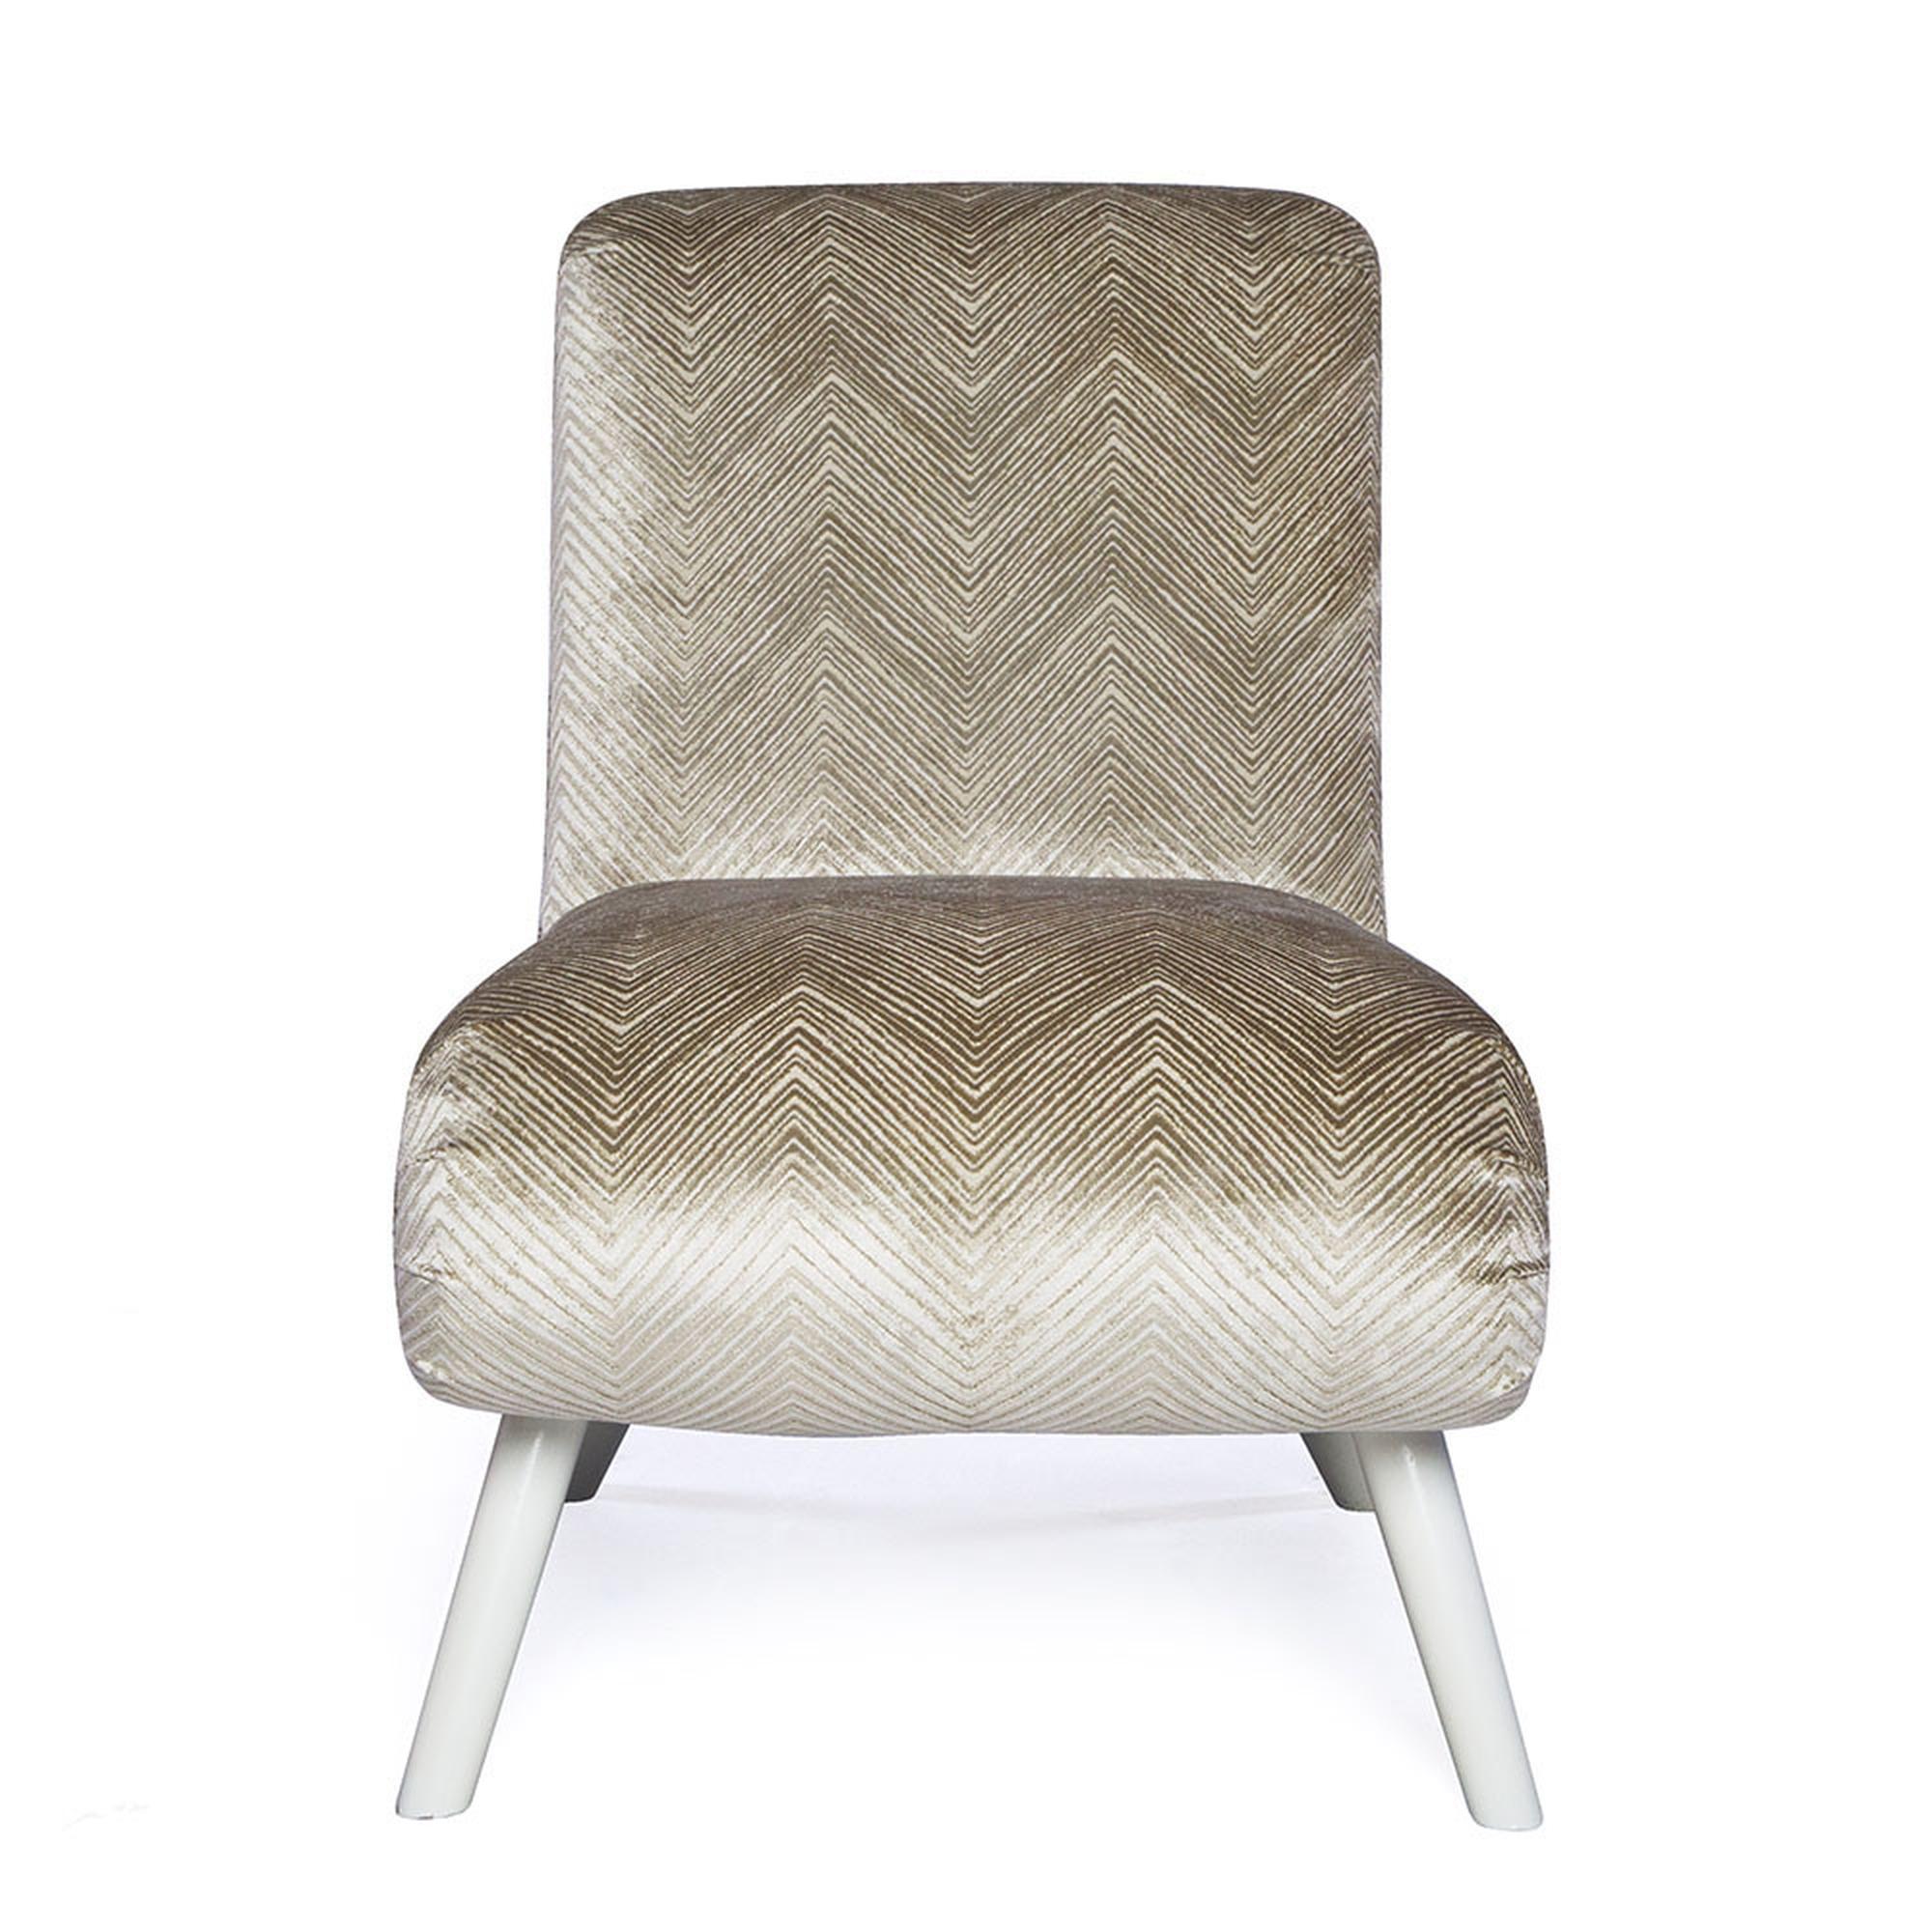 The Casablanca slipper chair is a stunning seat, attractive from all angles. Generously proportionate and extremely comfortable, this chair sits on tapered legs. The upholstered seat and back are tightly self-welted to the lacquered wooden side